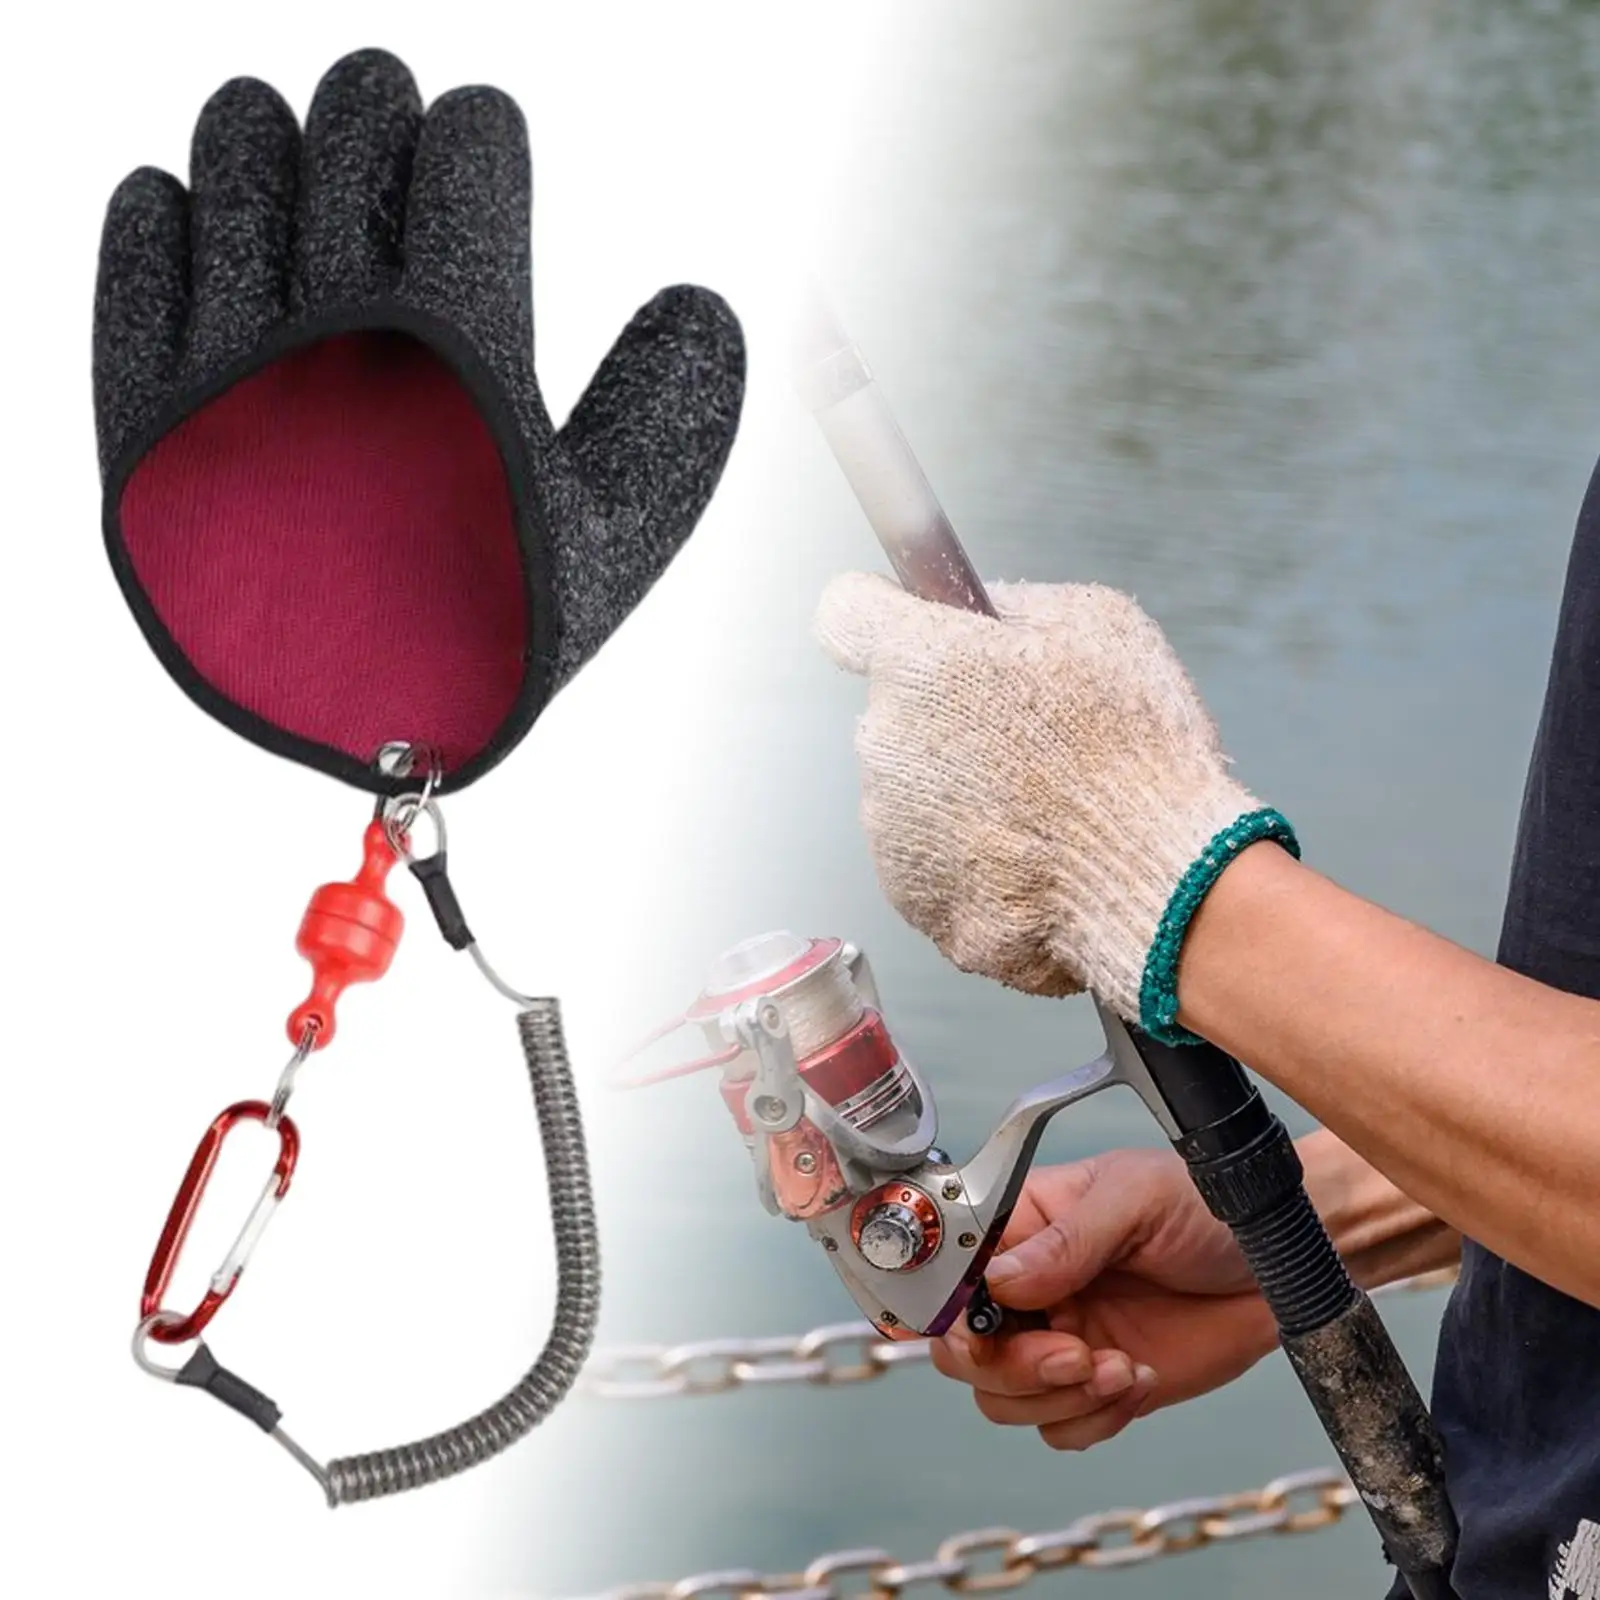 Fish Glove Puncture Resistant Fishing Gloves for Fisherman Cleaning Handling